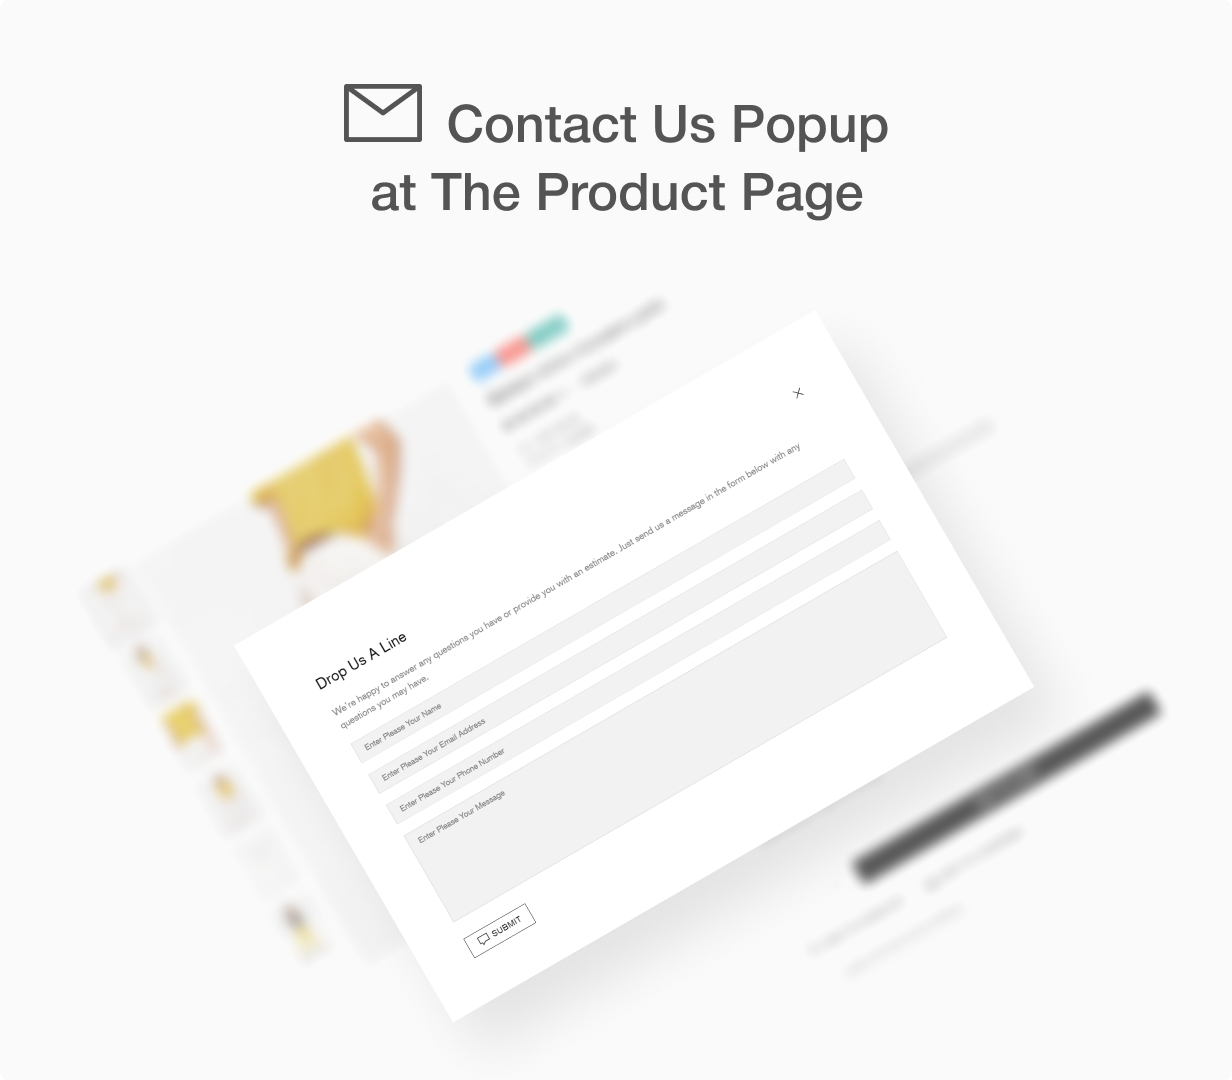 Product page. Contact popup.